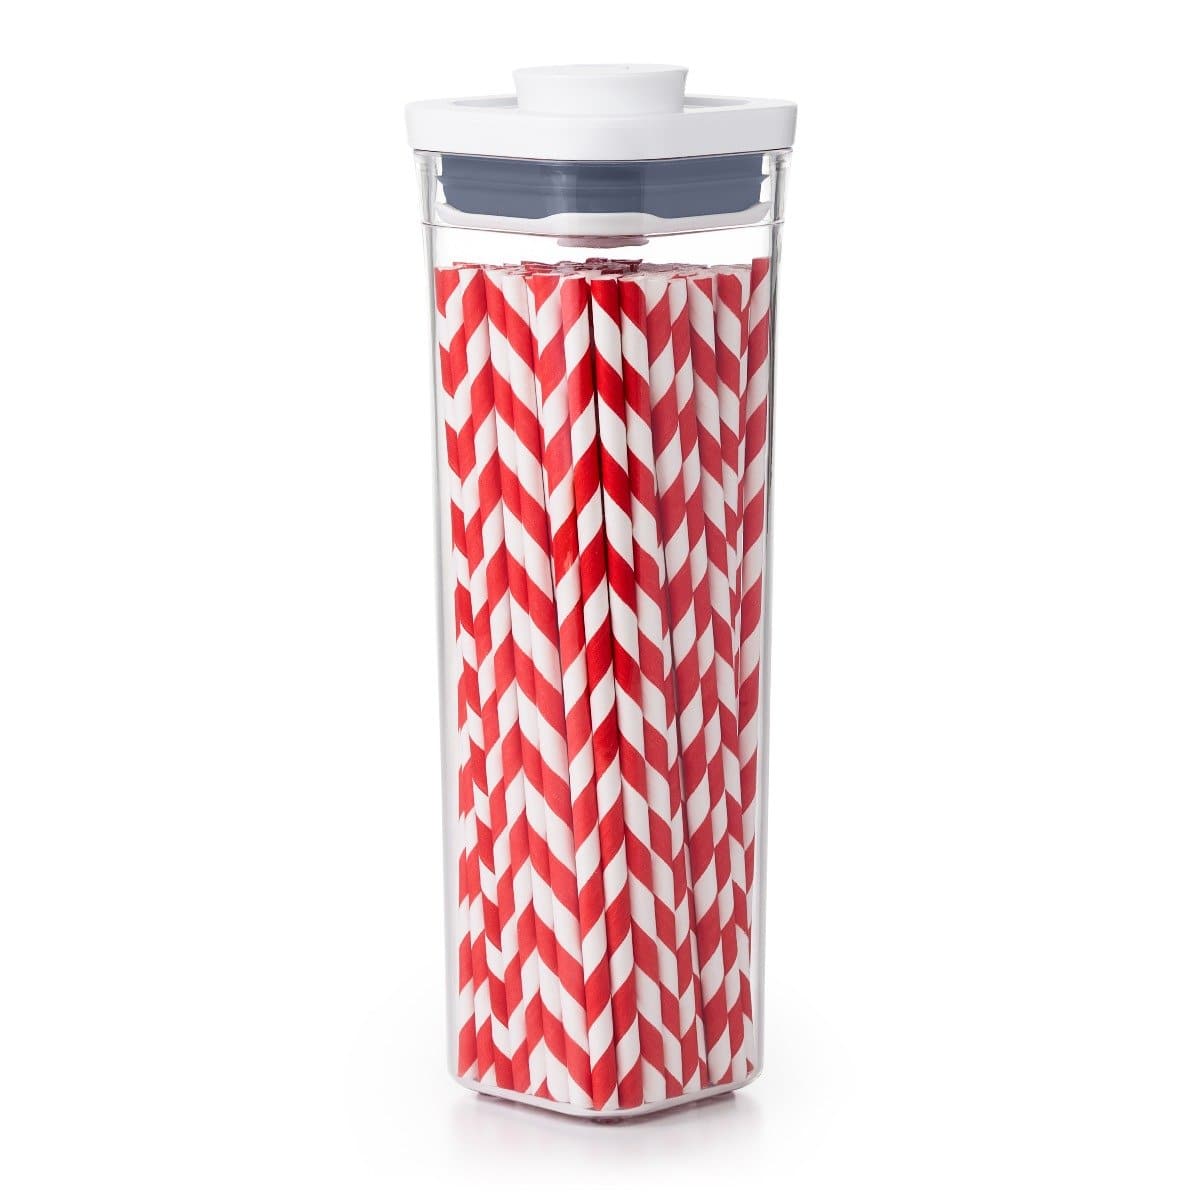 OXO Canisters OXO .8 Qt POP Square Canister